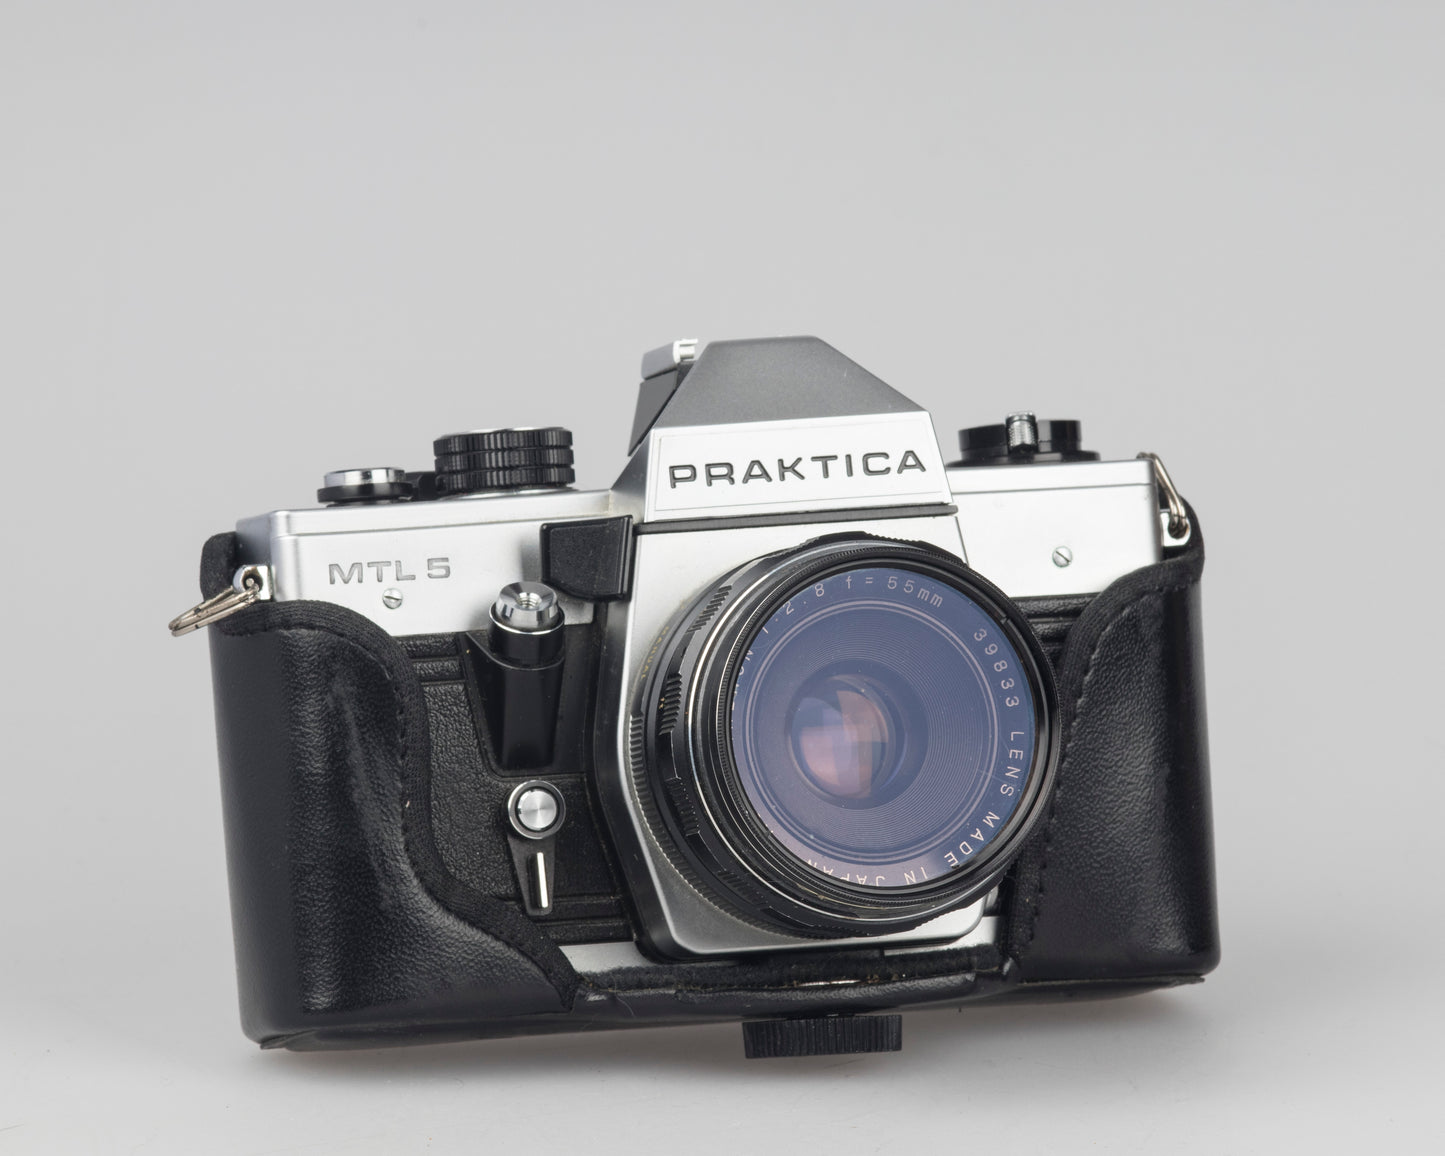 Praktica MTL 5 35mm SLR camera. Made in DDR in the 1980s. It features a metal bladed vertical shutter.